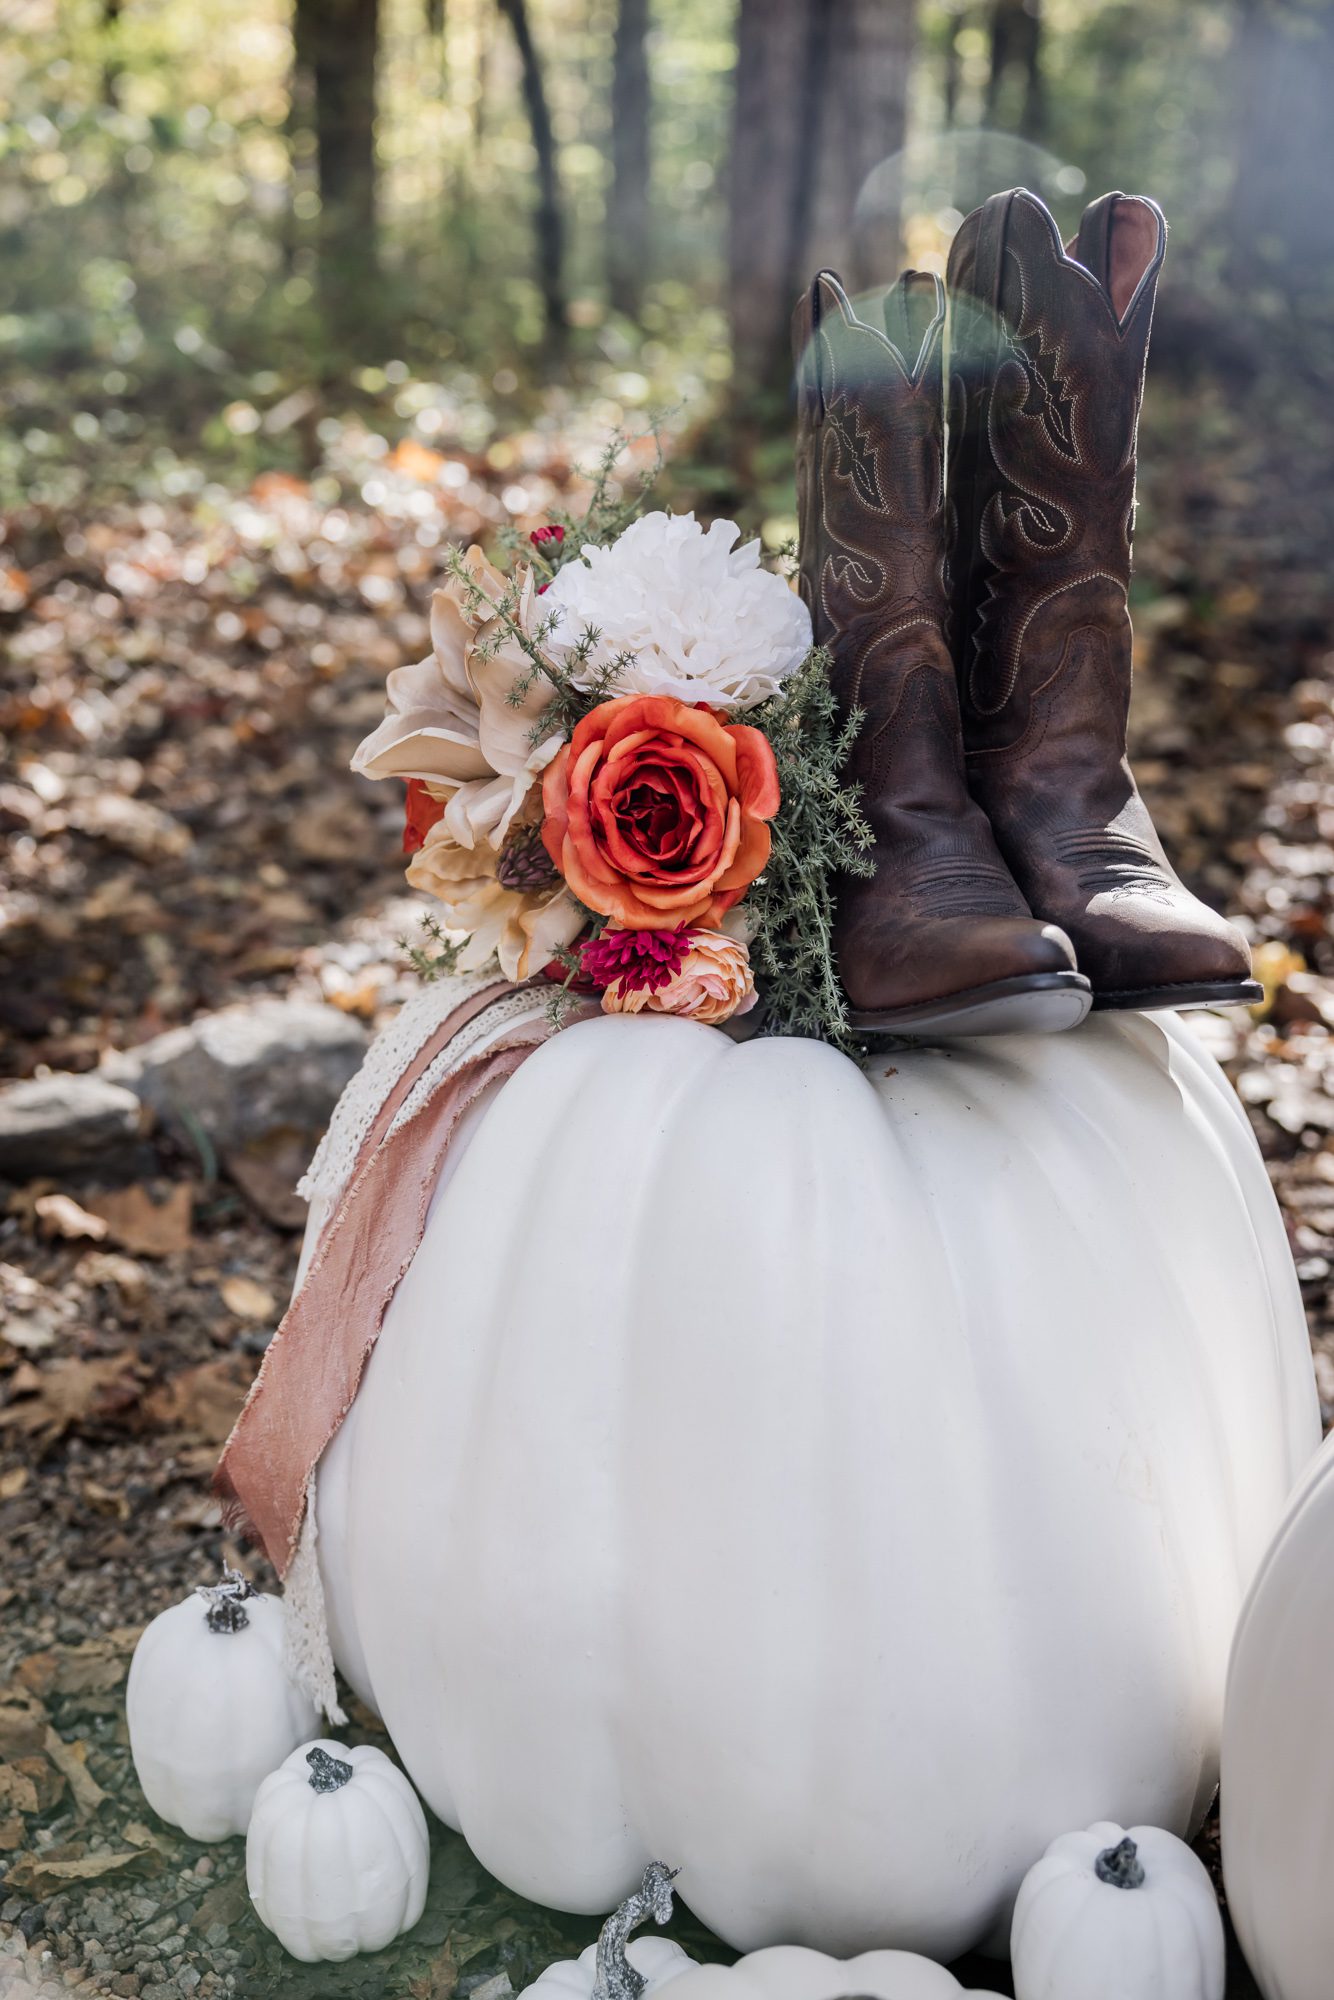 Boots and Bouquet on a pumpkin